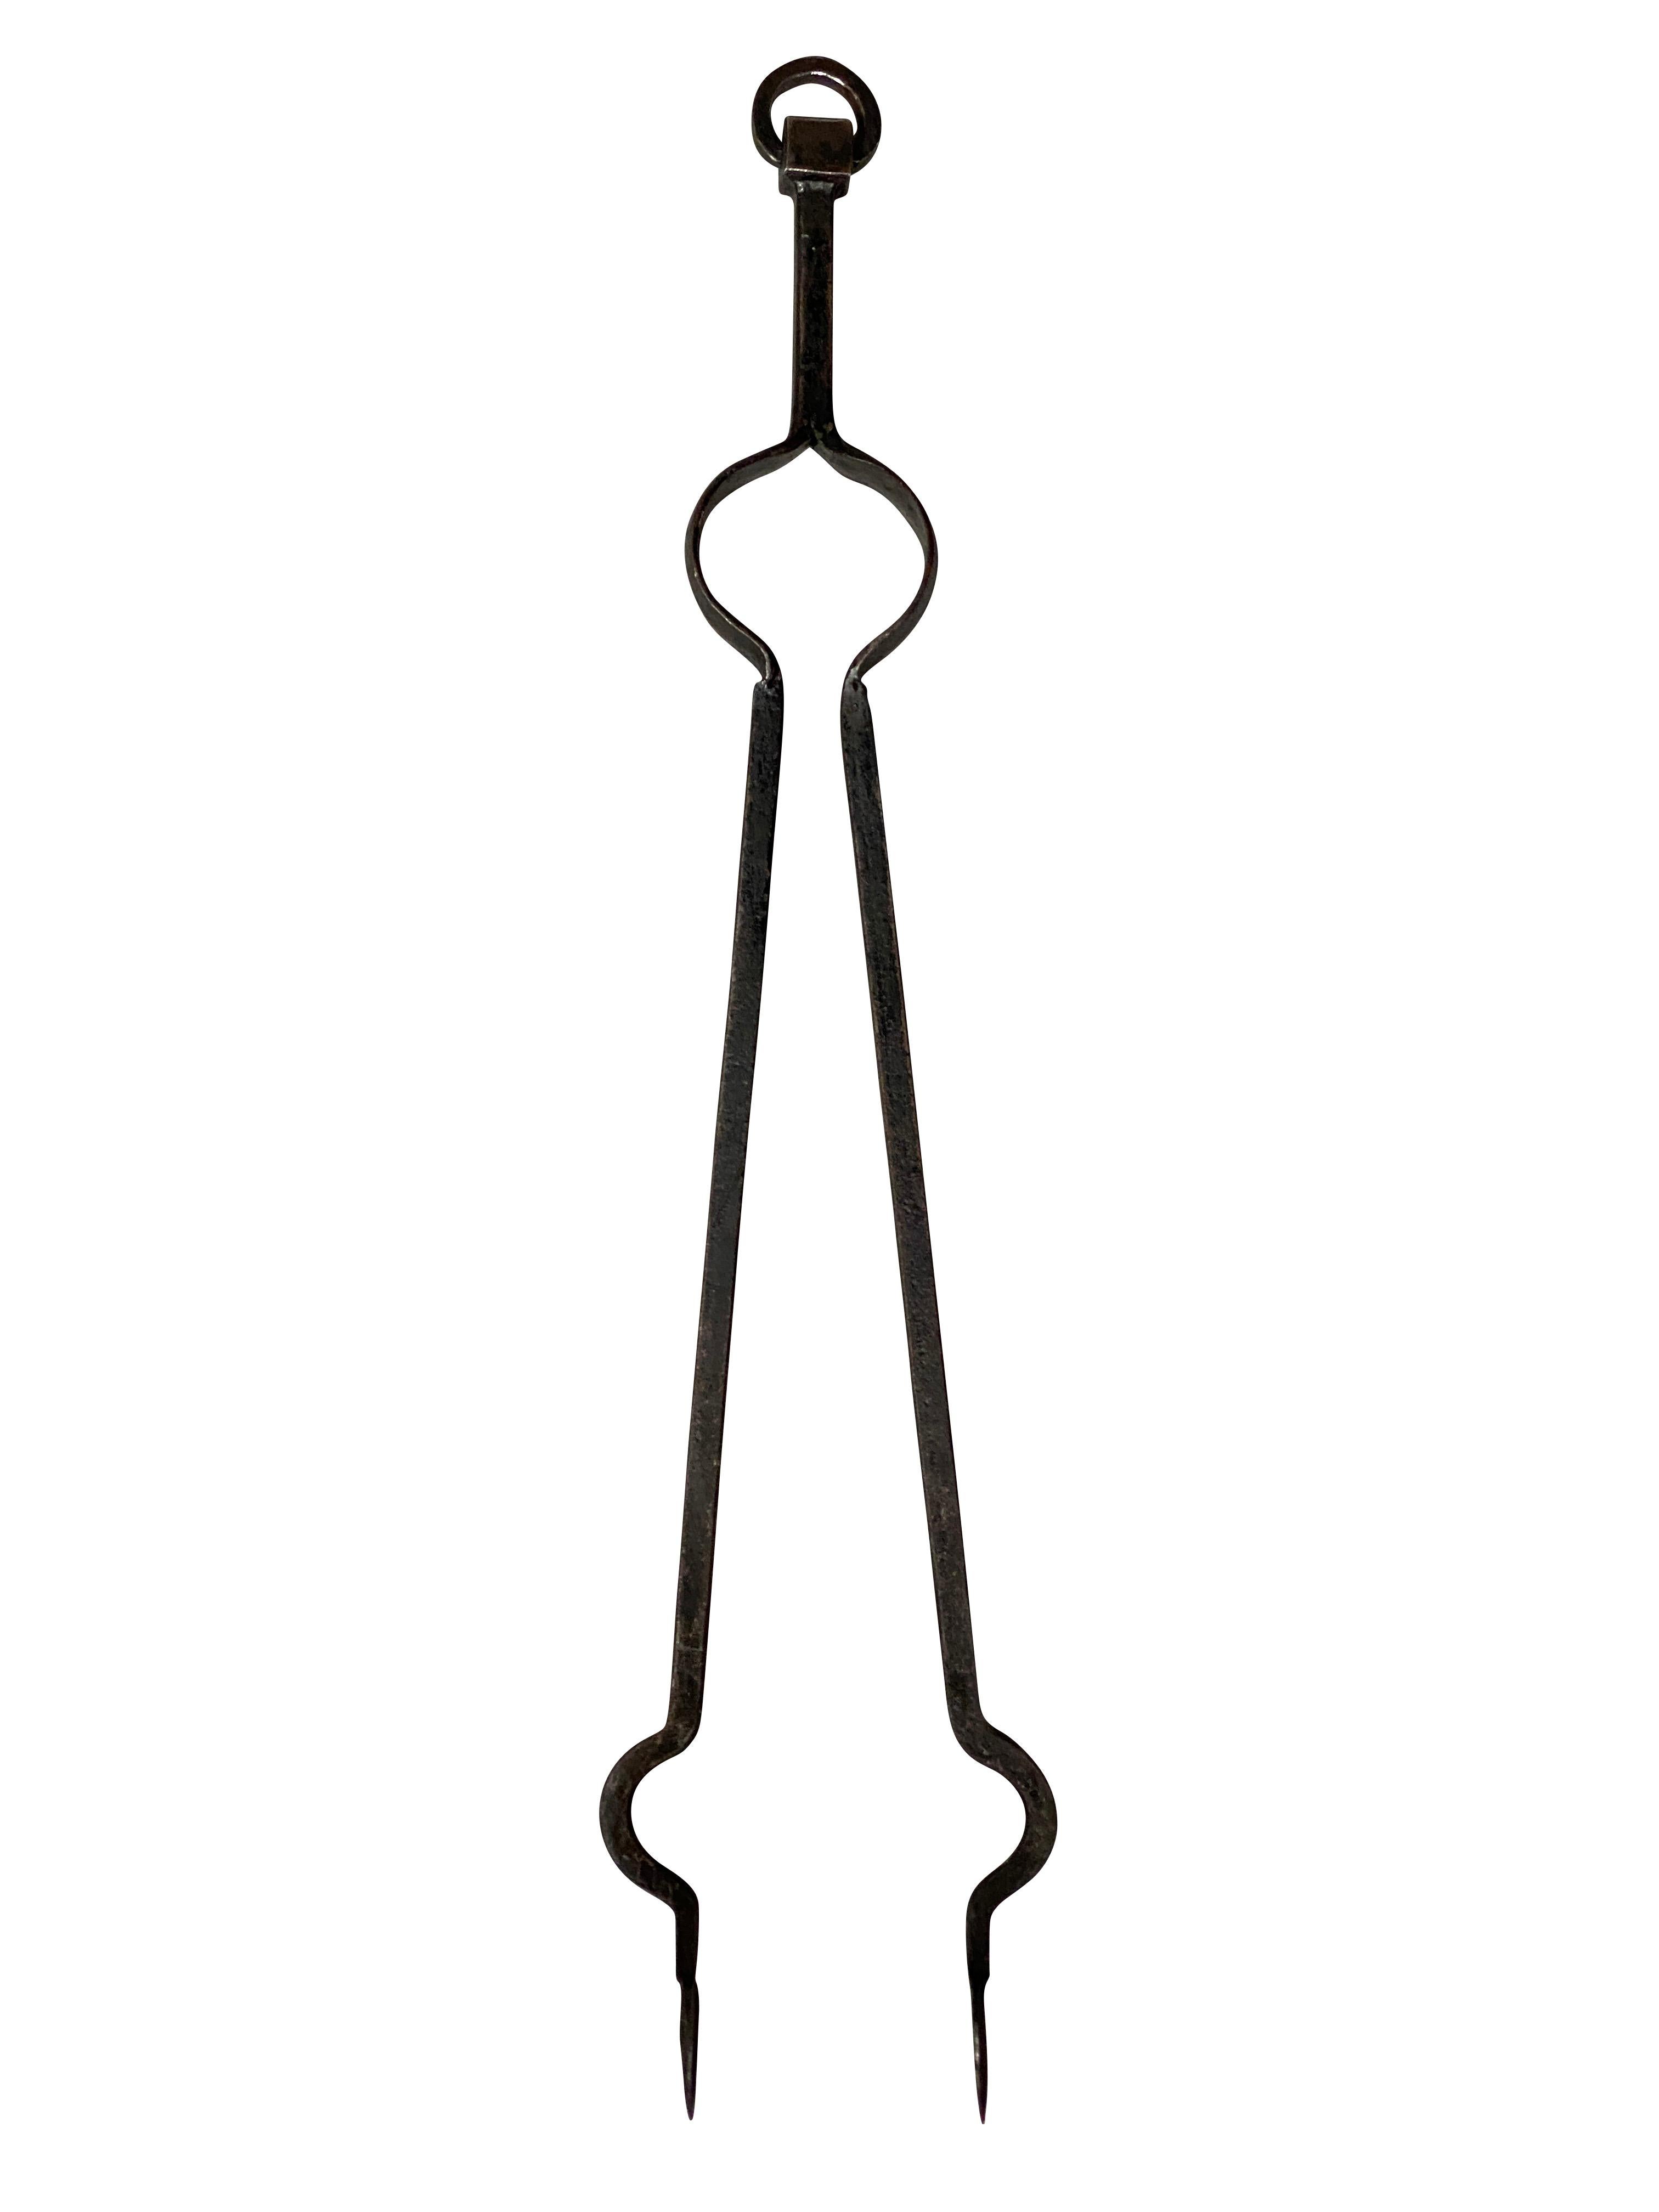 Comprising a poker, shovel and tongs. Heavy gauge with nice patina. Conforming stand with three legs and flat round feet.